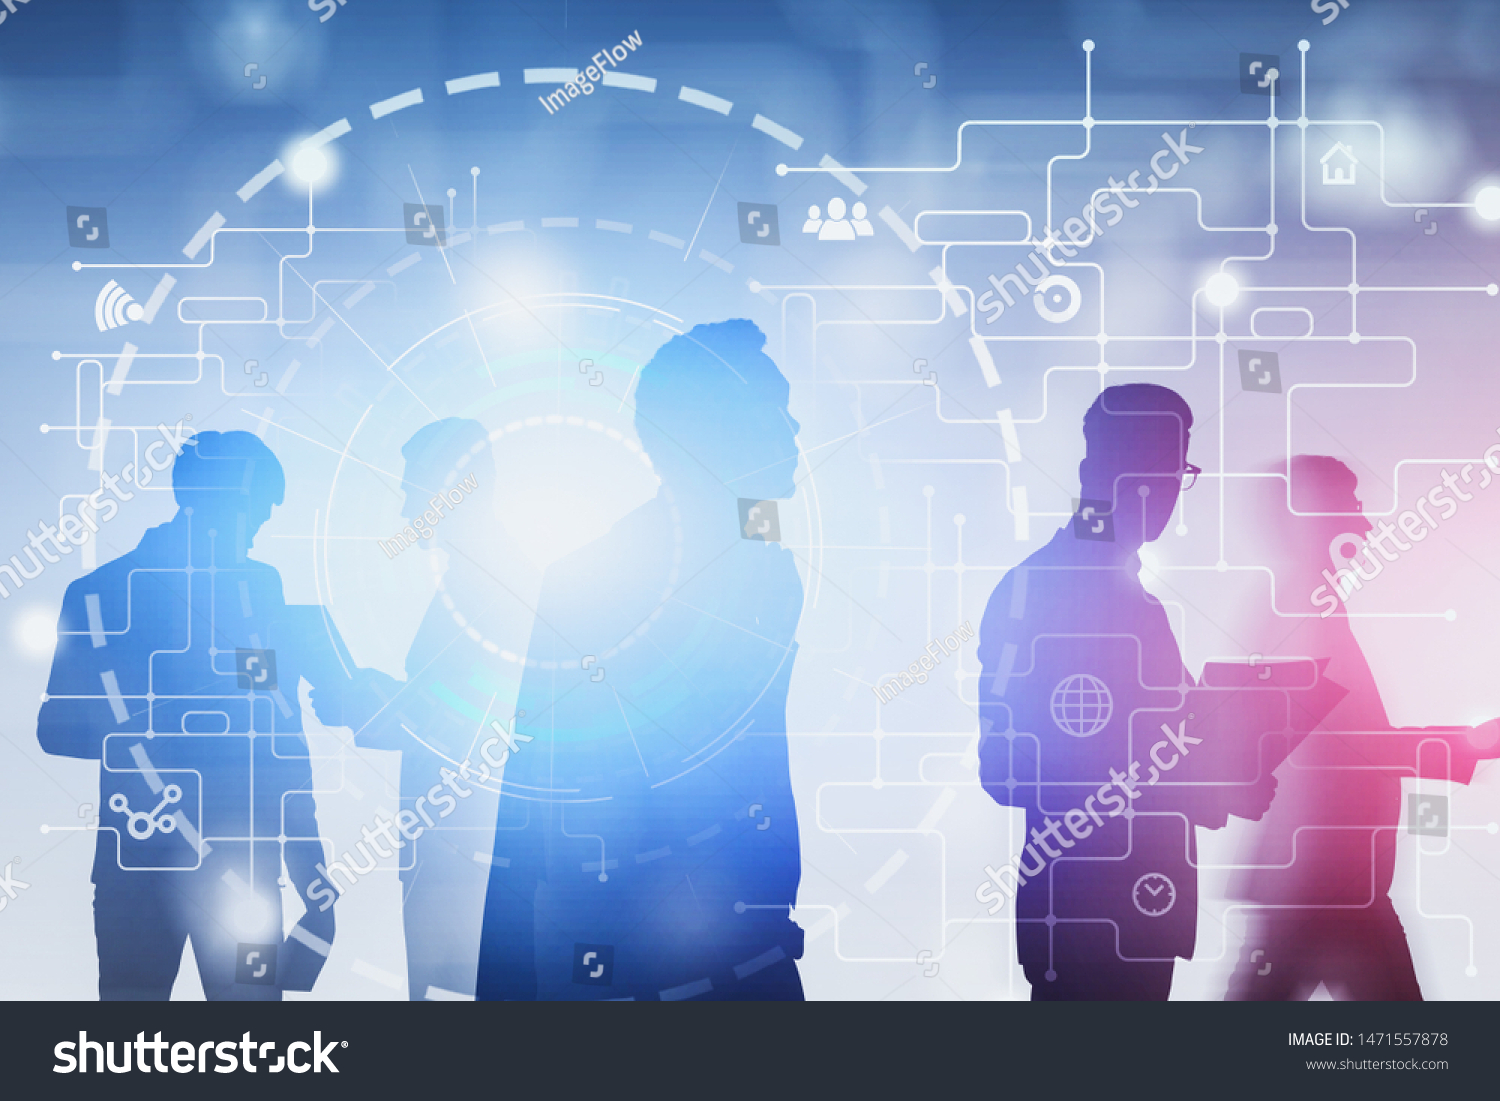 Silhouettes Diverse Business People Working Together Stock Photo ...